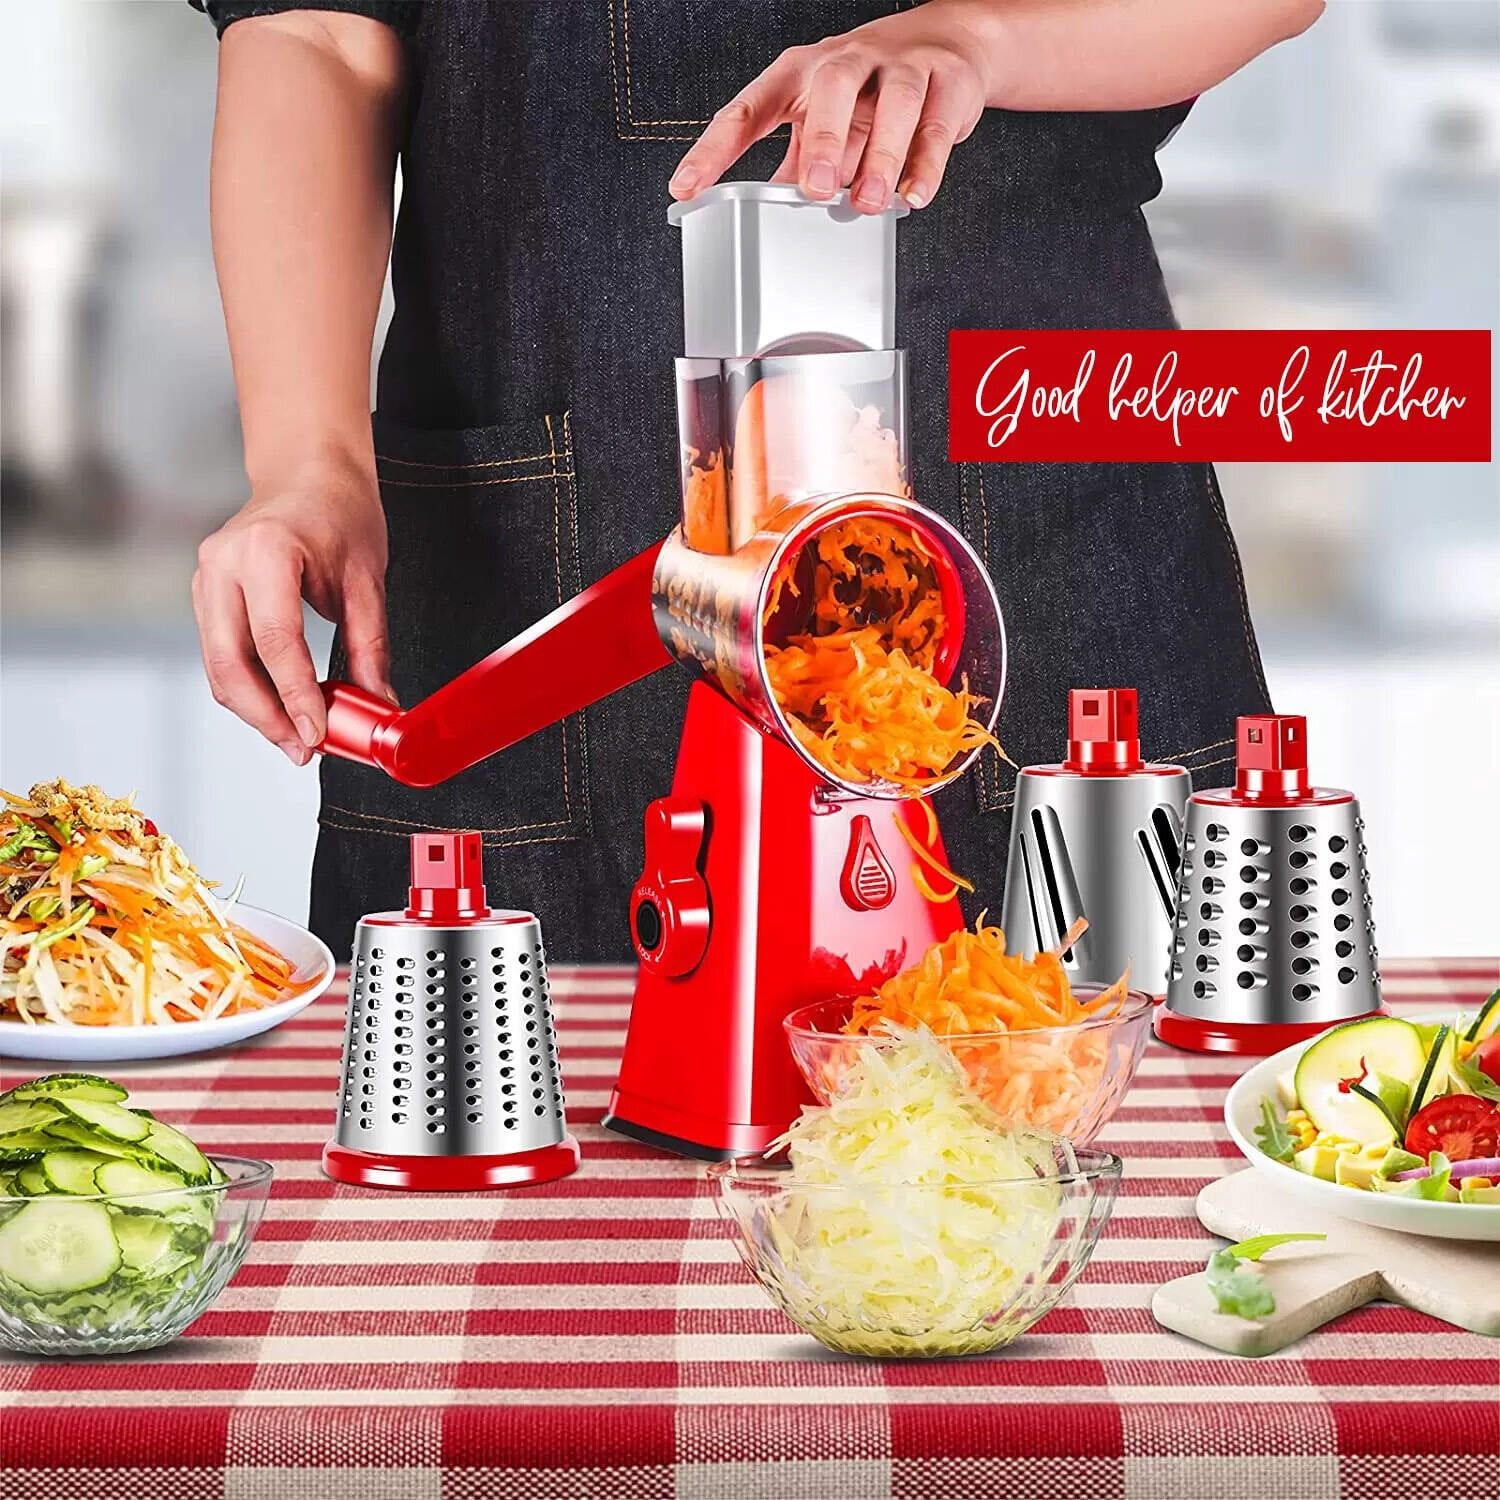 Cheers.US Rotary Cheese Grater for Kitchen, Stainless Steel Cheese Shredder  with Sharp Drum, Easy to Clean Manual Rotary Grater for Vegetables, Parmesan,  Chocolate and More 